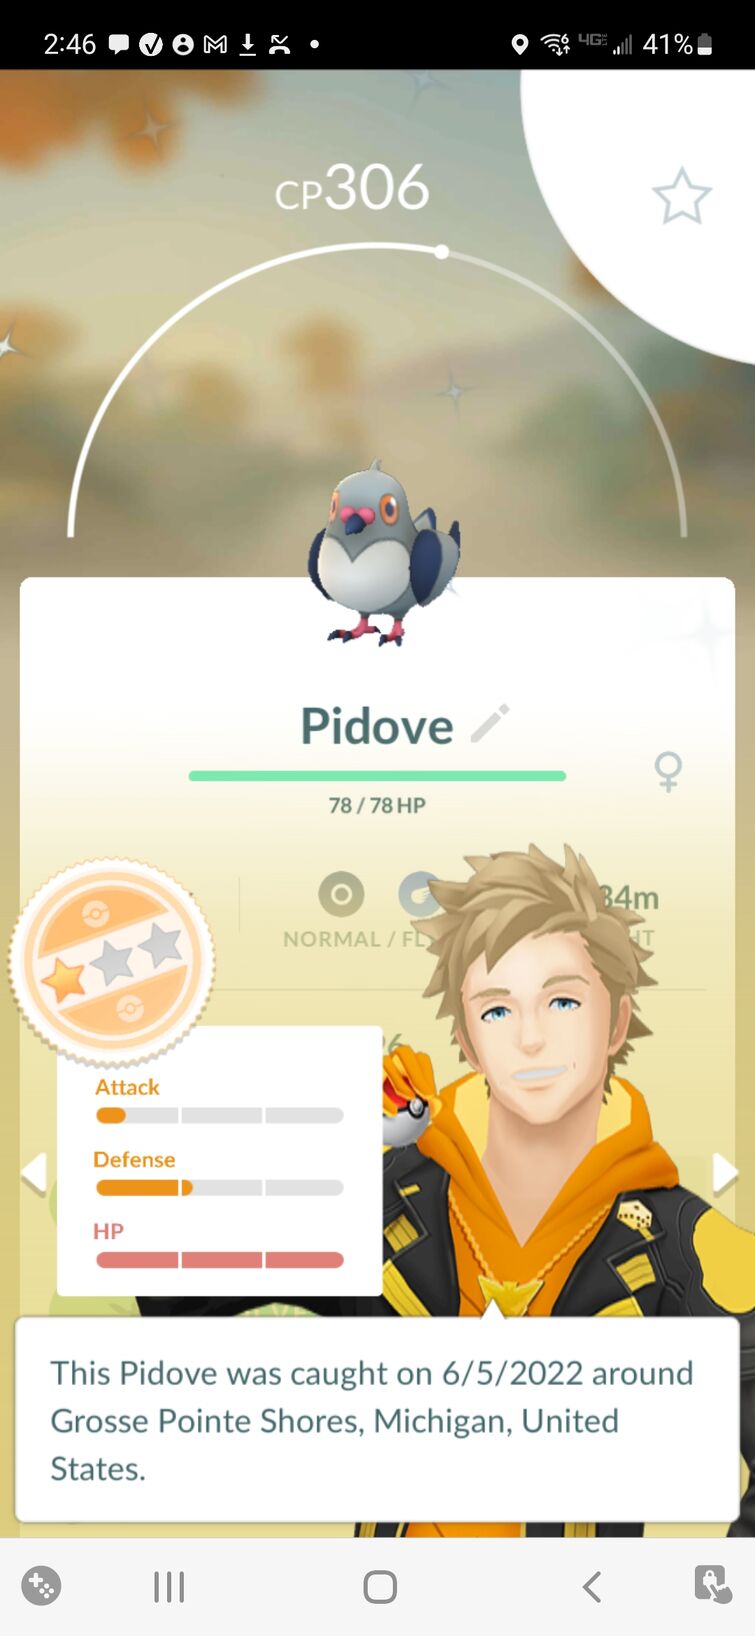 Pokémon GO - The results are in! Congrats to the elite few who